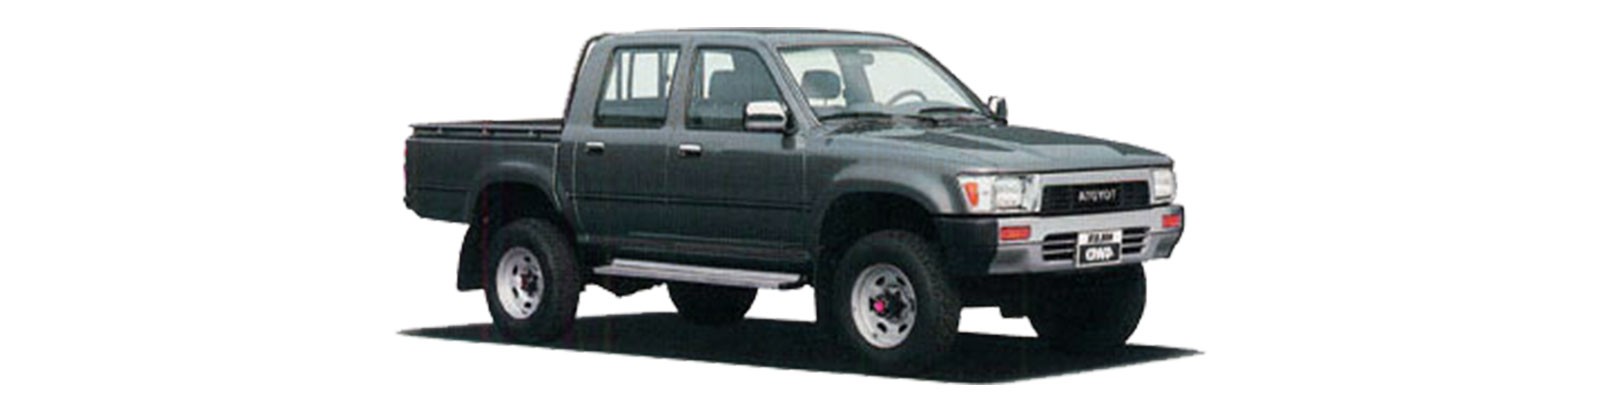 Accessories for Toyota Hilux Single Cab 1988-1998